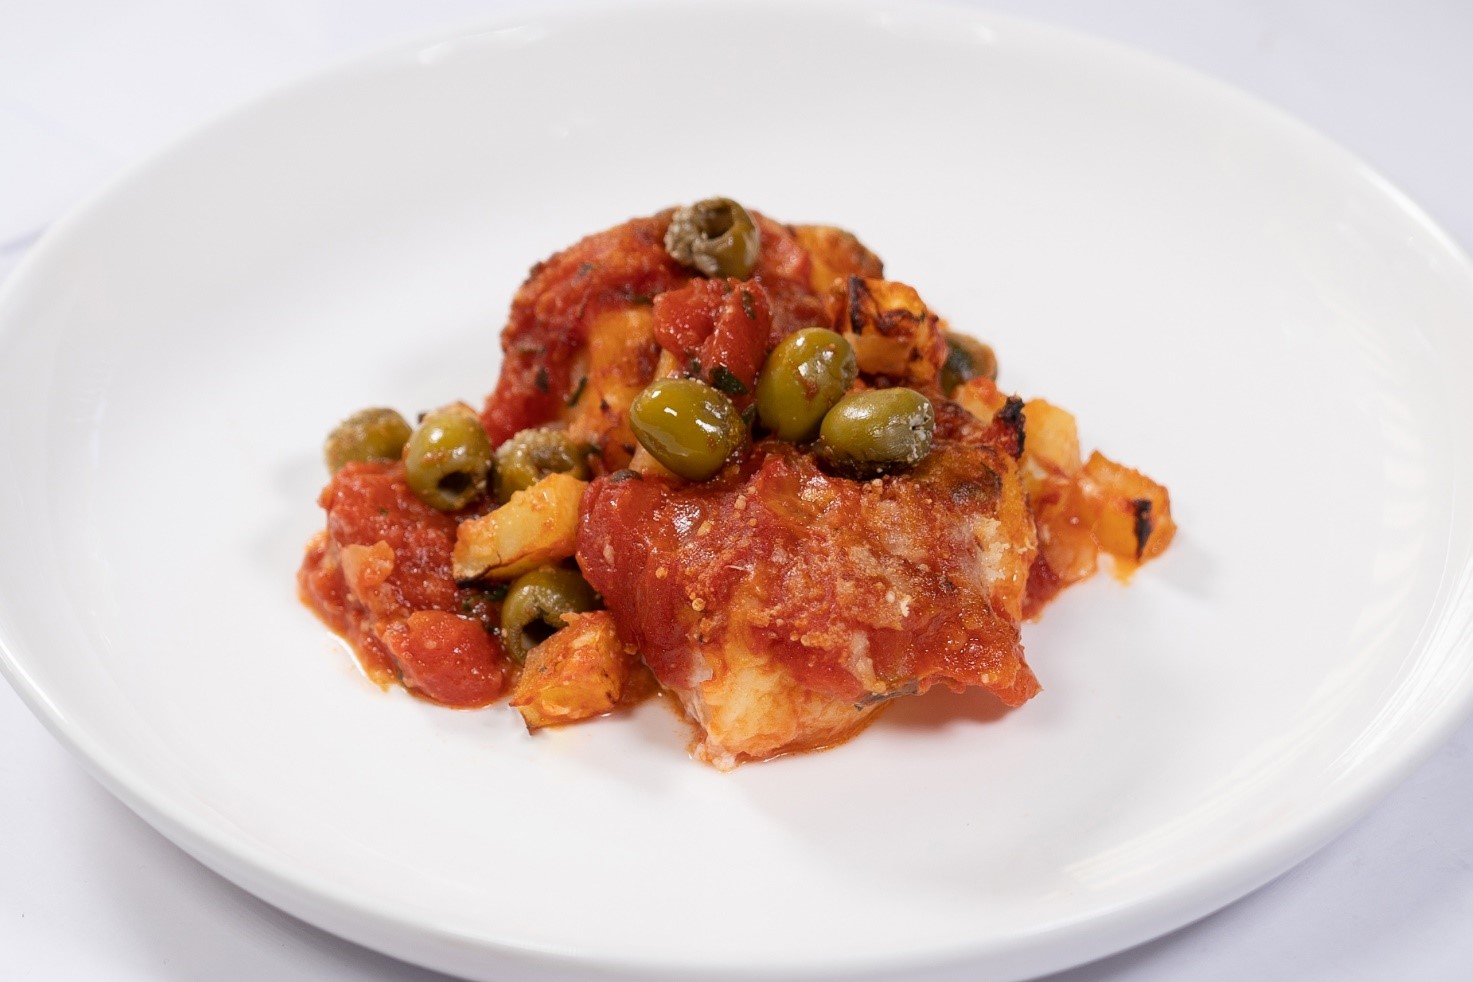 Baked salt cod with potatoes and olives in tomato sauce